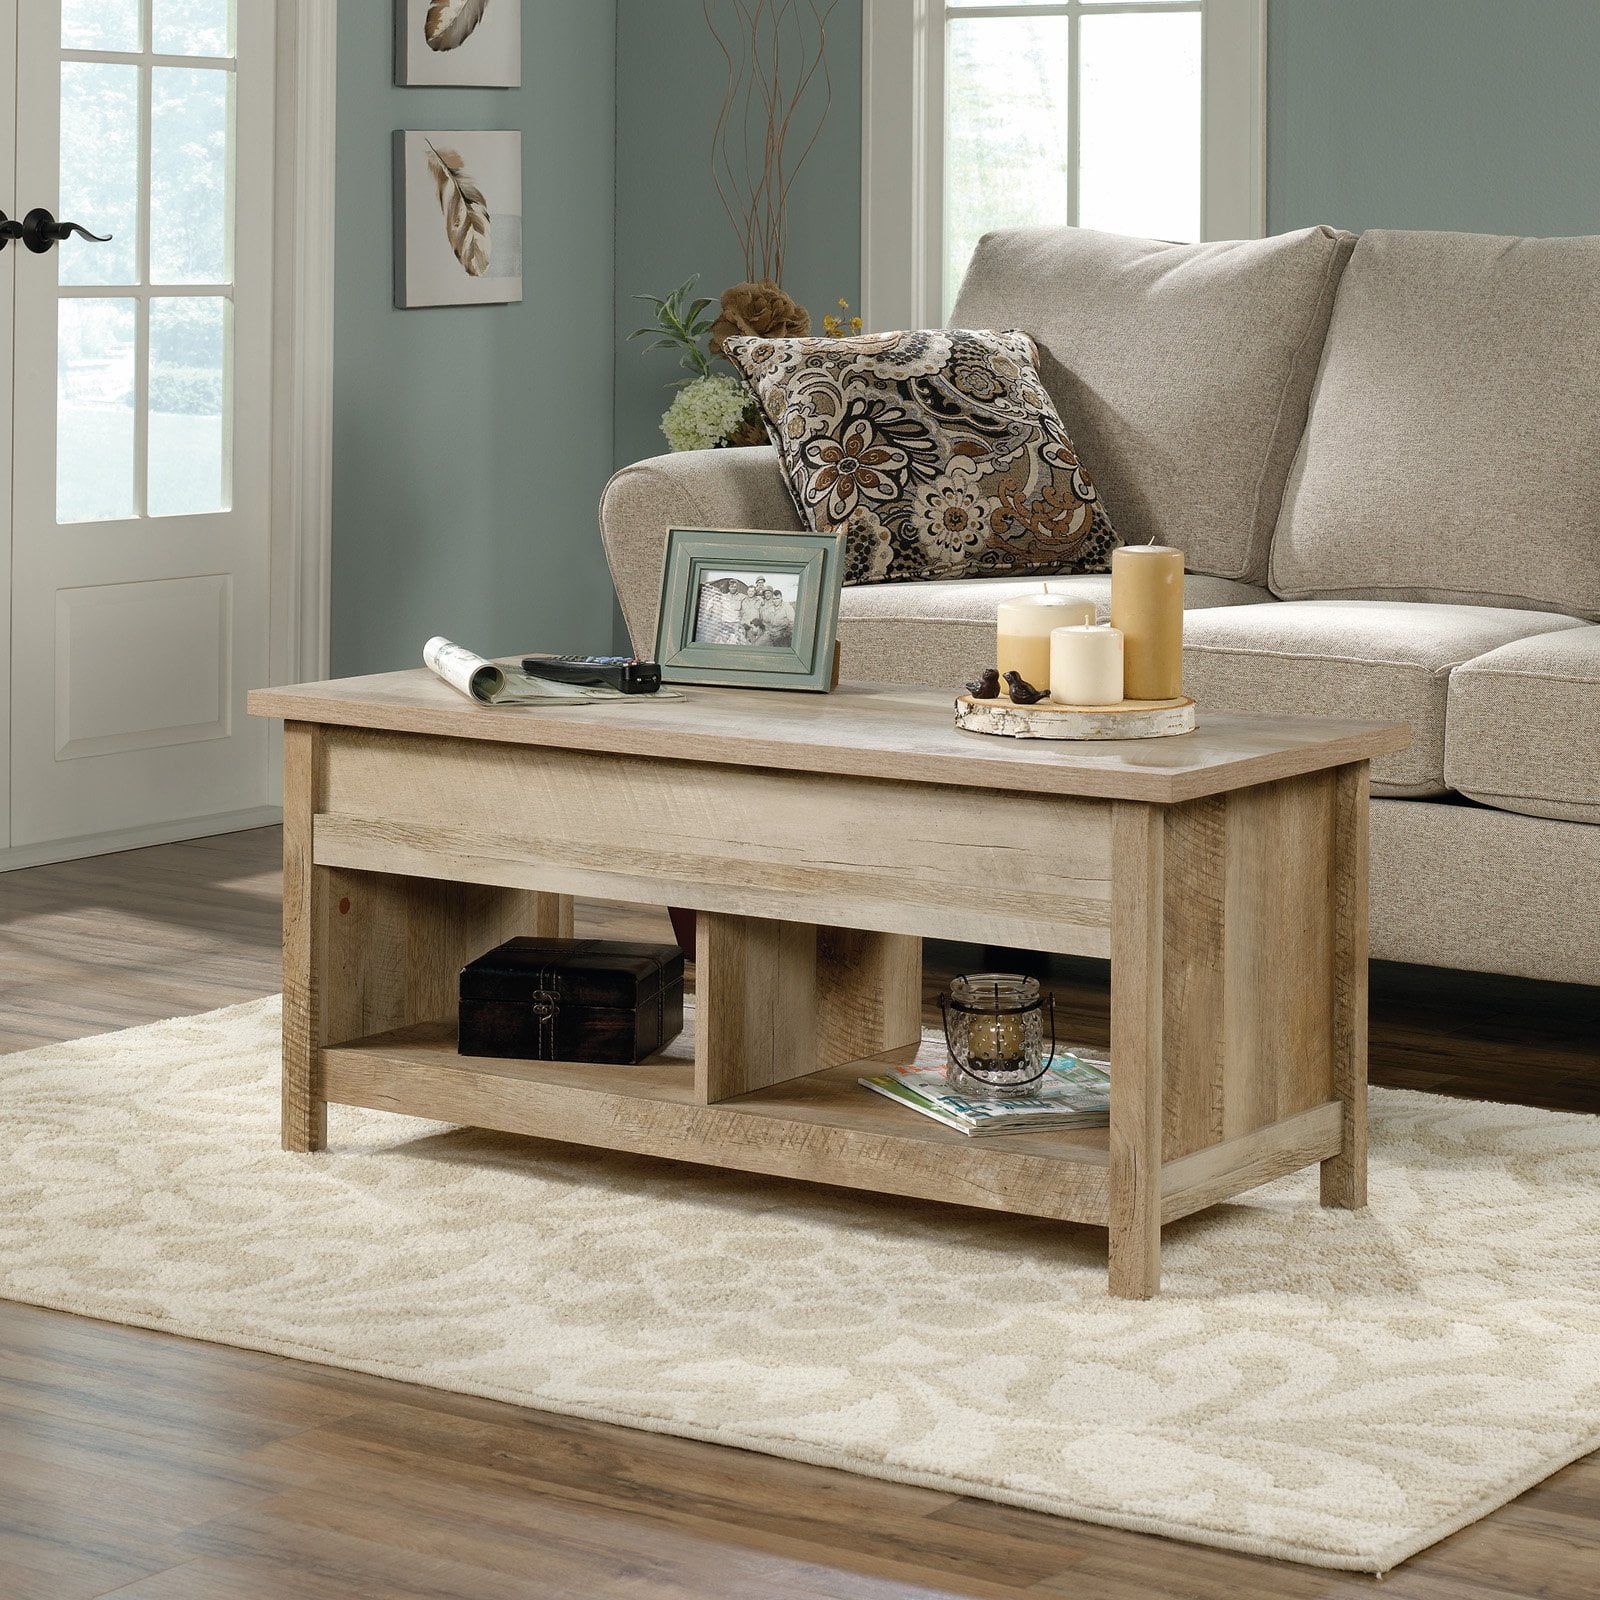 Sauder Modern Farmhouse Lift Top Storage Coffee Table Rustic Oak Finish With Regard To Farmhouse Lift Top Tables (Gallery 14 of 20)